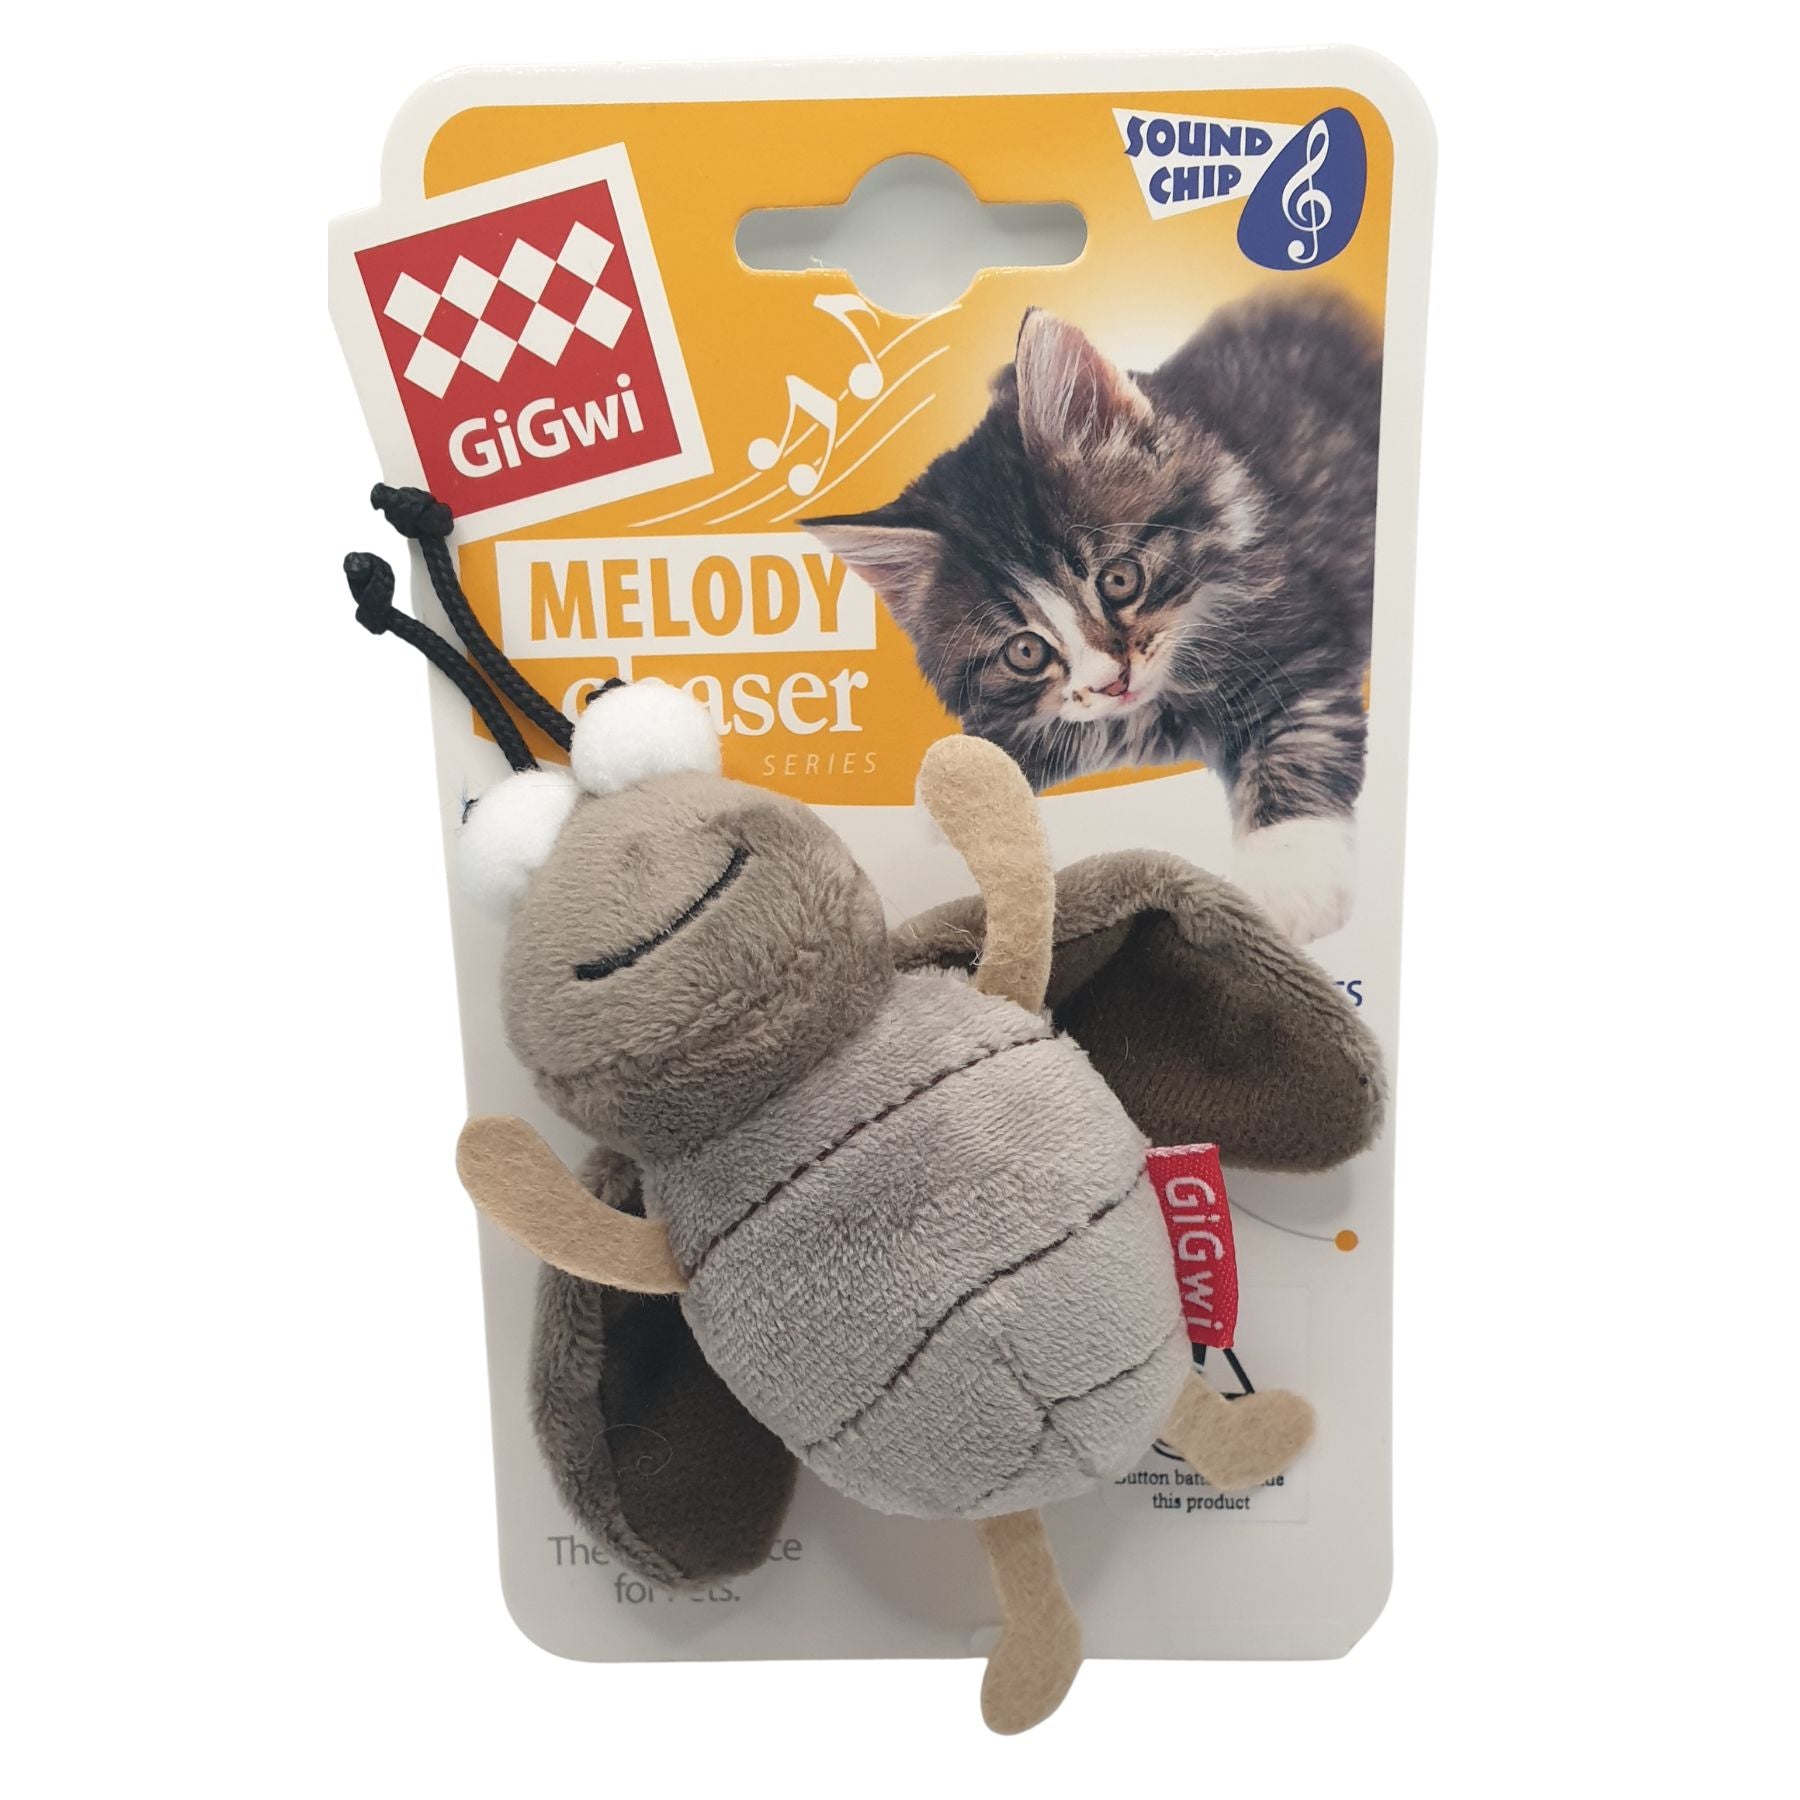 GIGWI Melody Chaser Cricket Motion Active Cat Toy